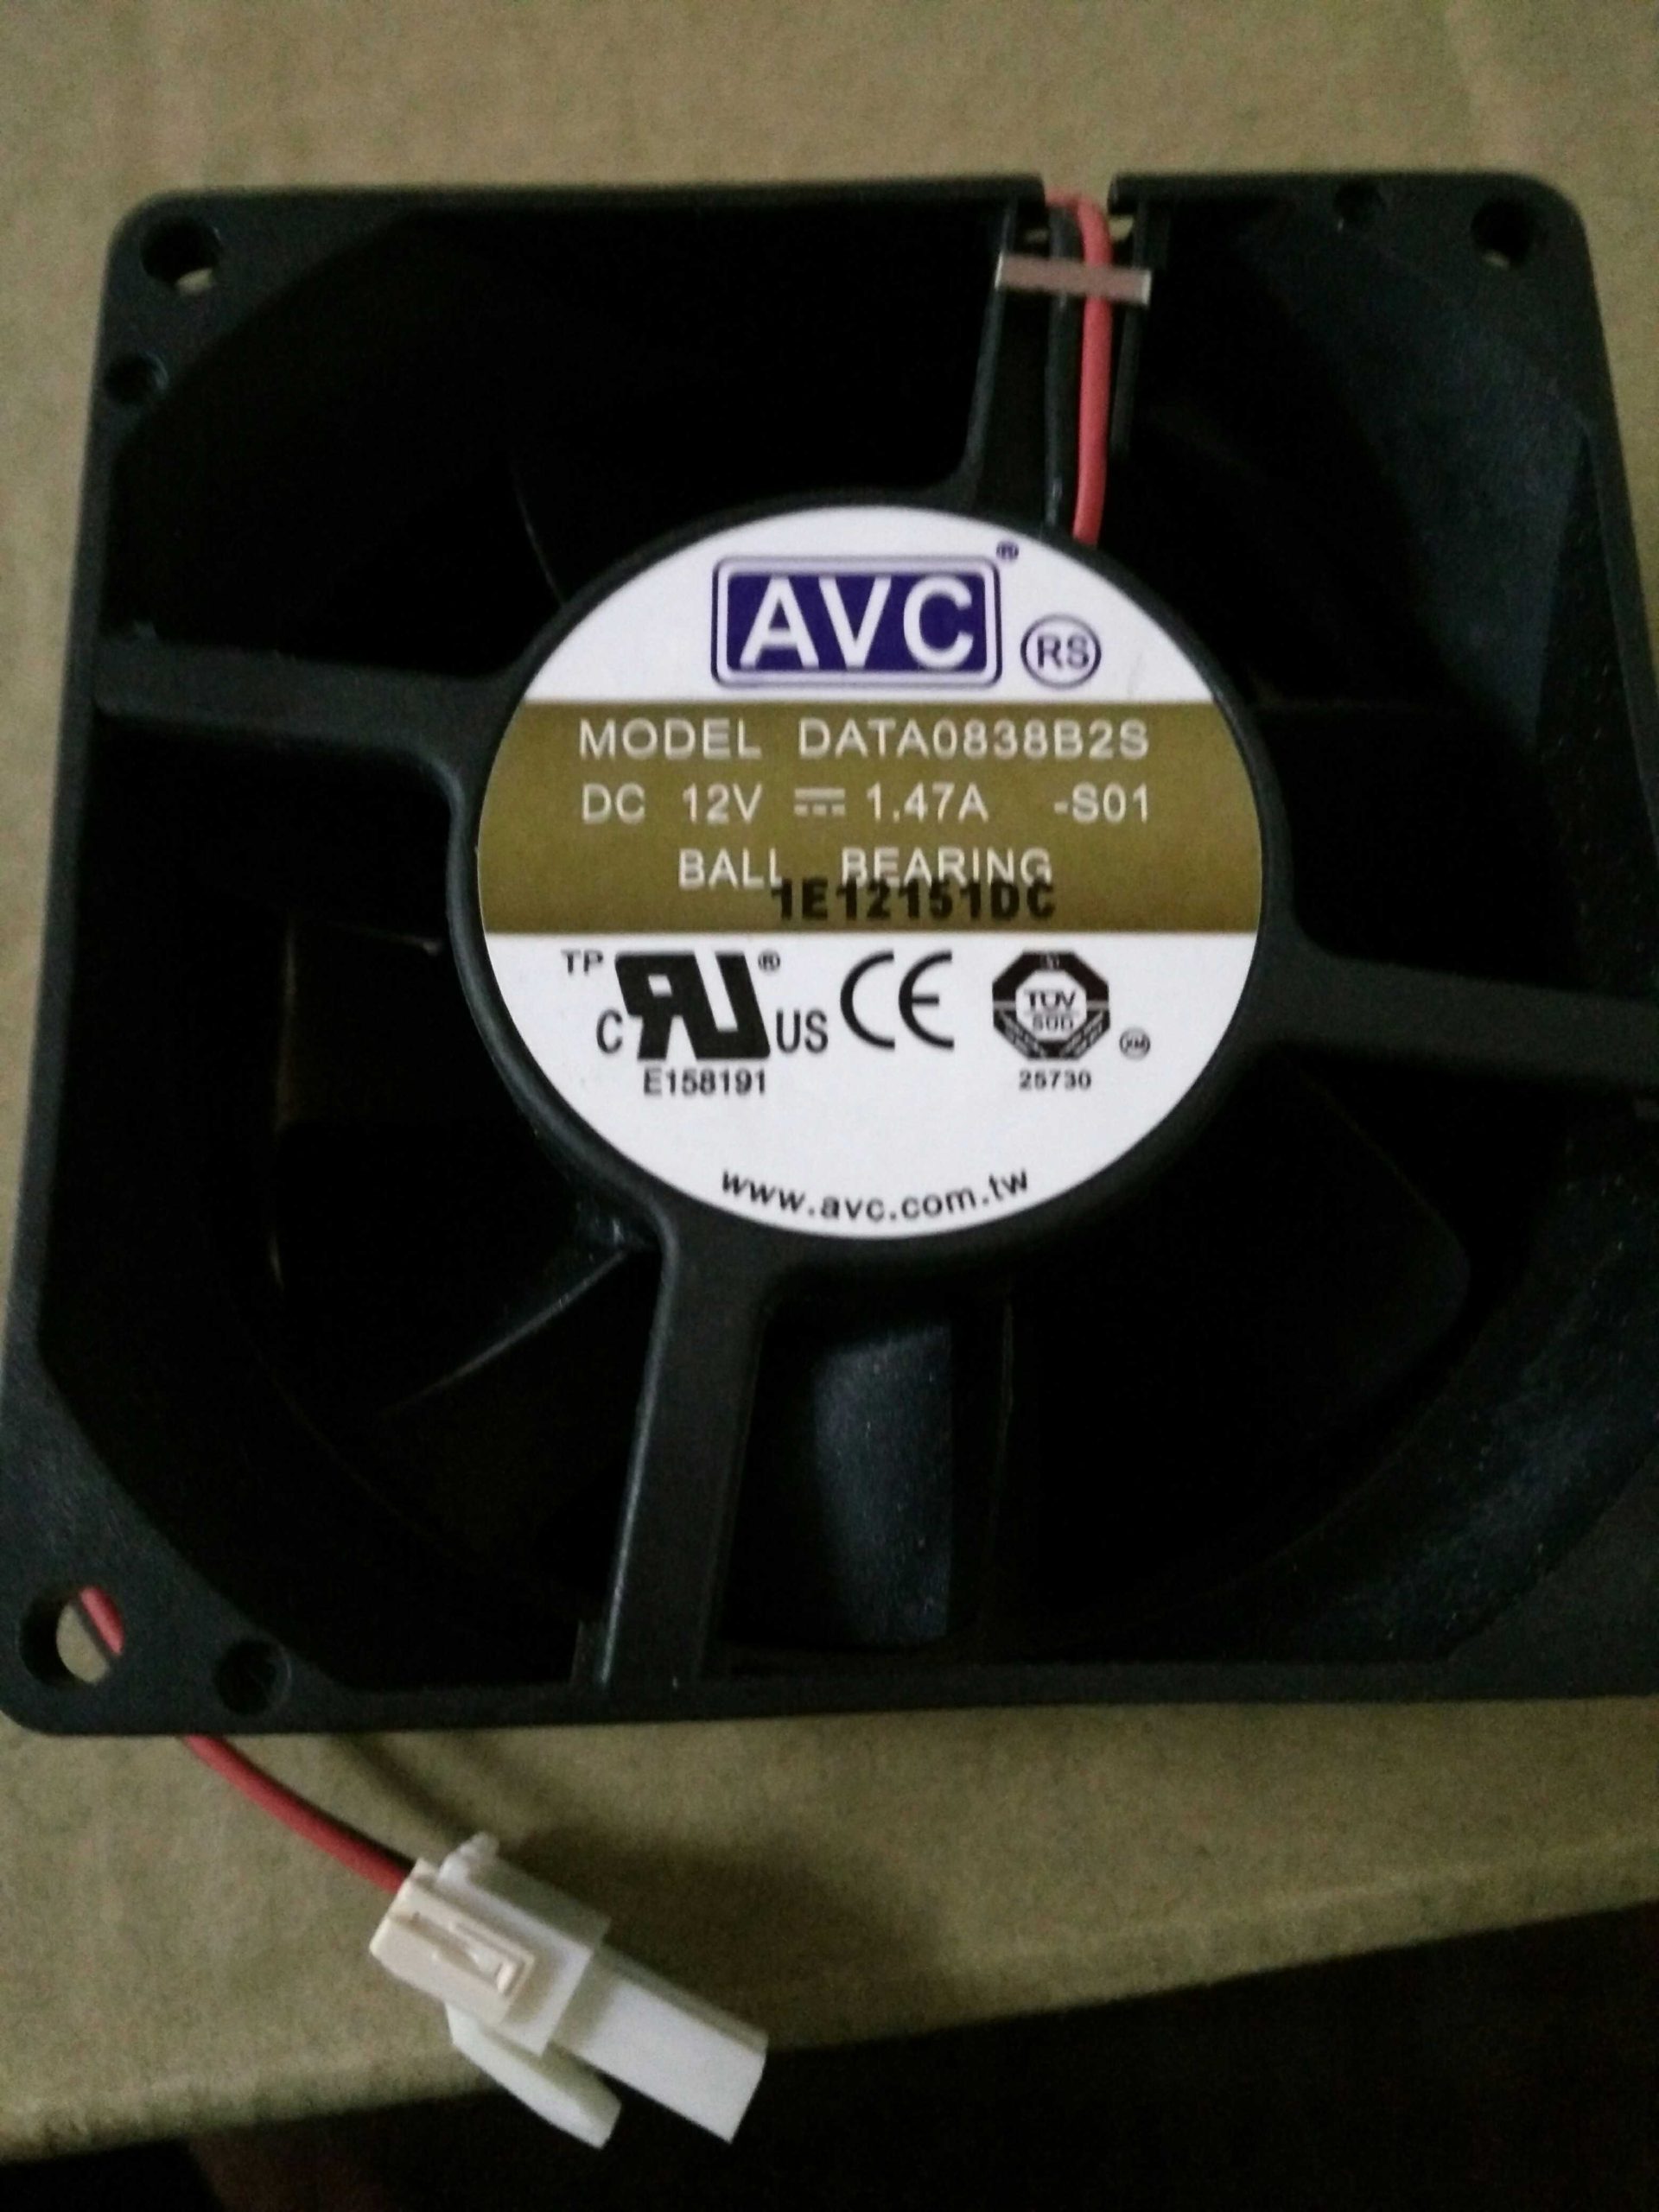 AVC DATA0838B2S 12V 1.47A 2wires cooling fan